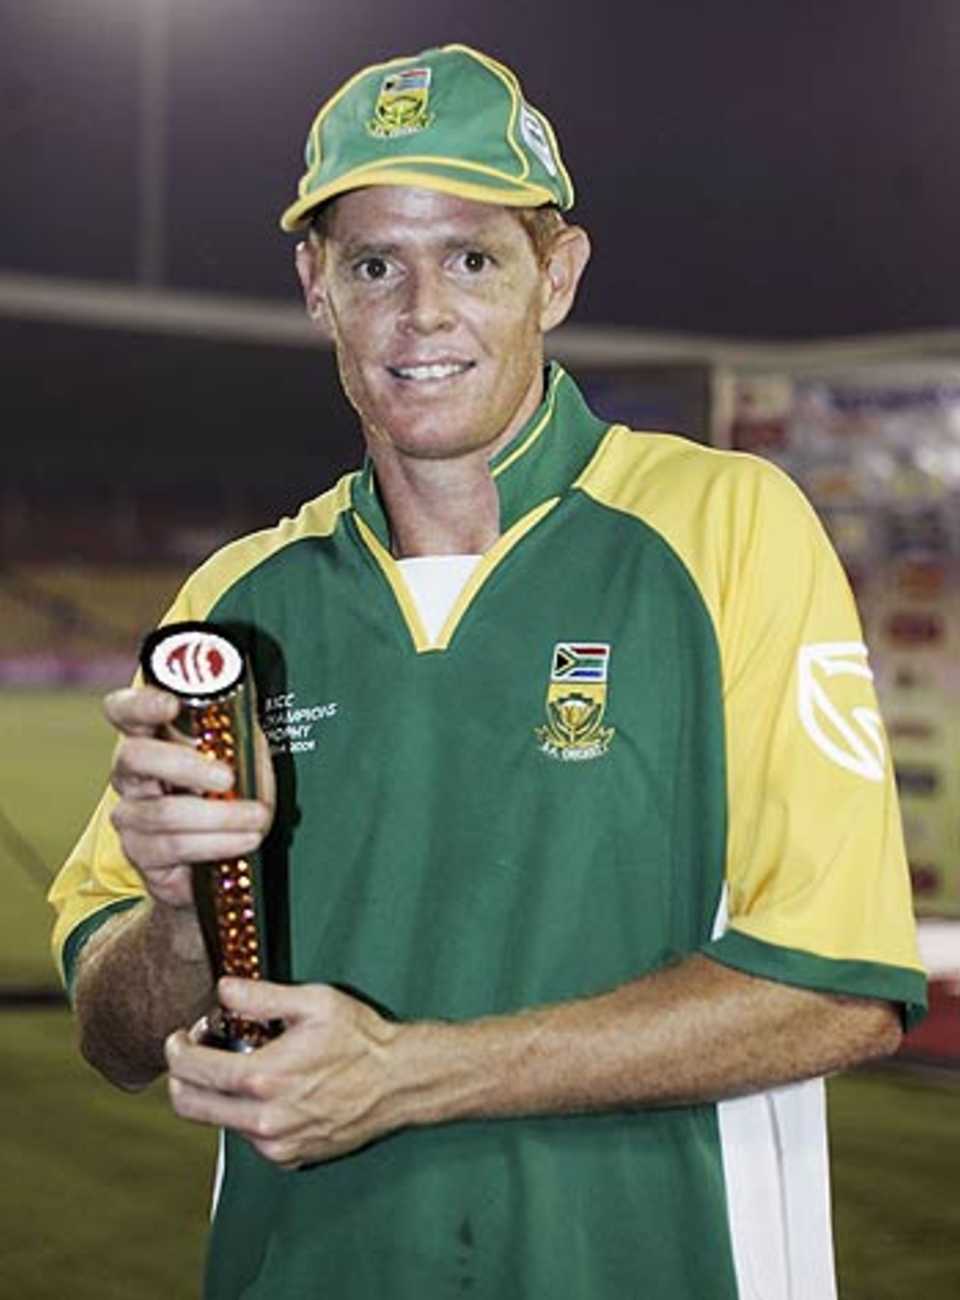 Shaun Pollock poses with the Man-of-the-Match award for his inspired performance in the field, South Africa v Sri Lanka, 7th match, Champions Trophy, Ahmedabad, October 24, 2006